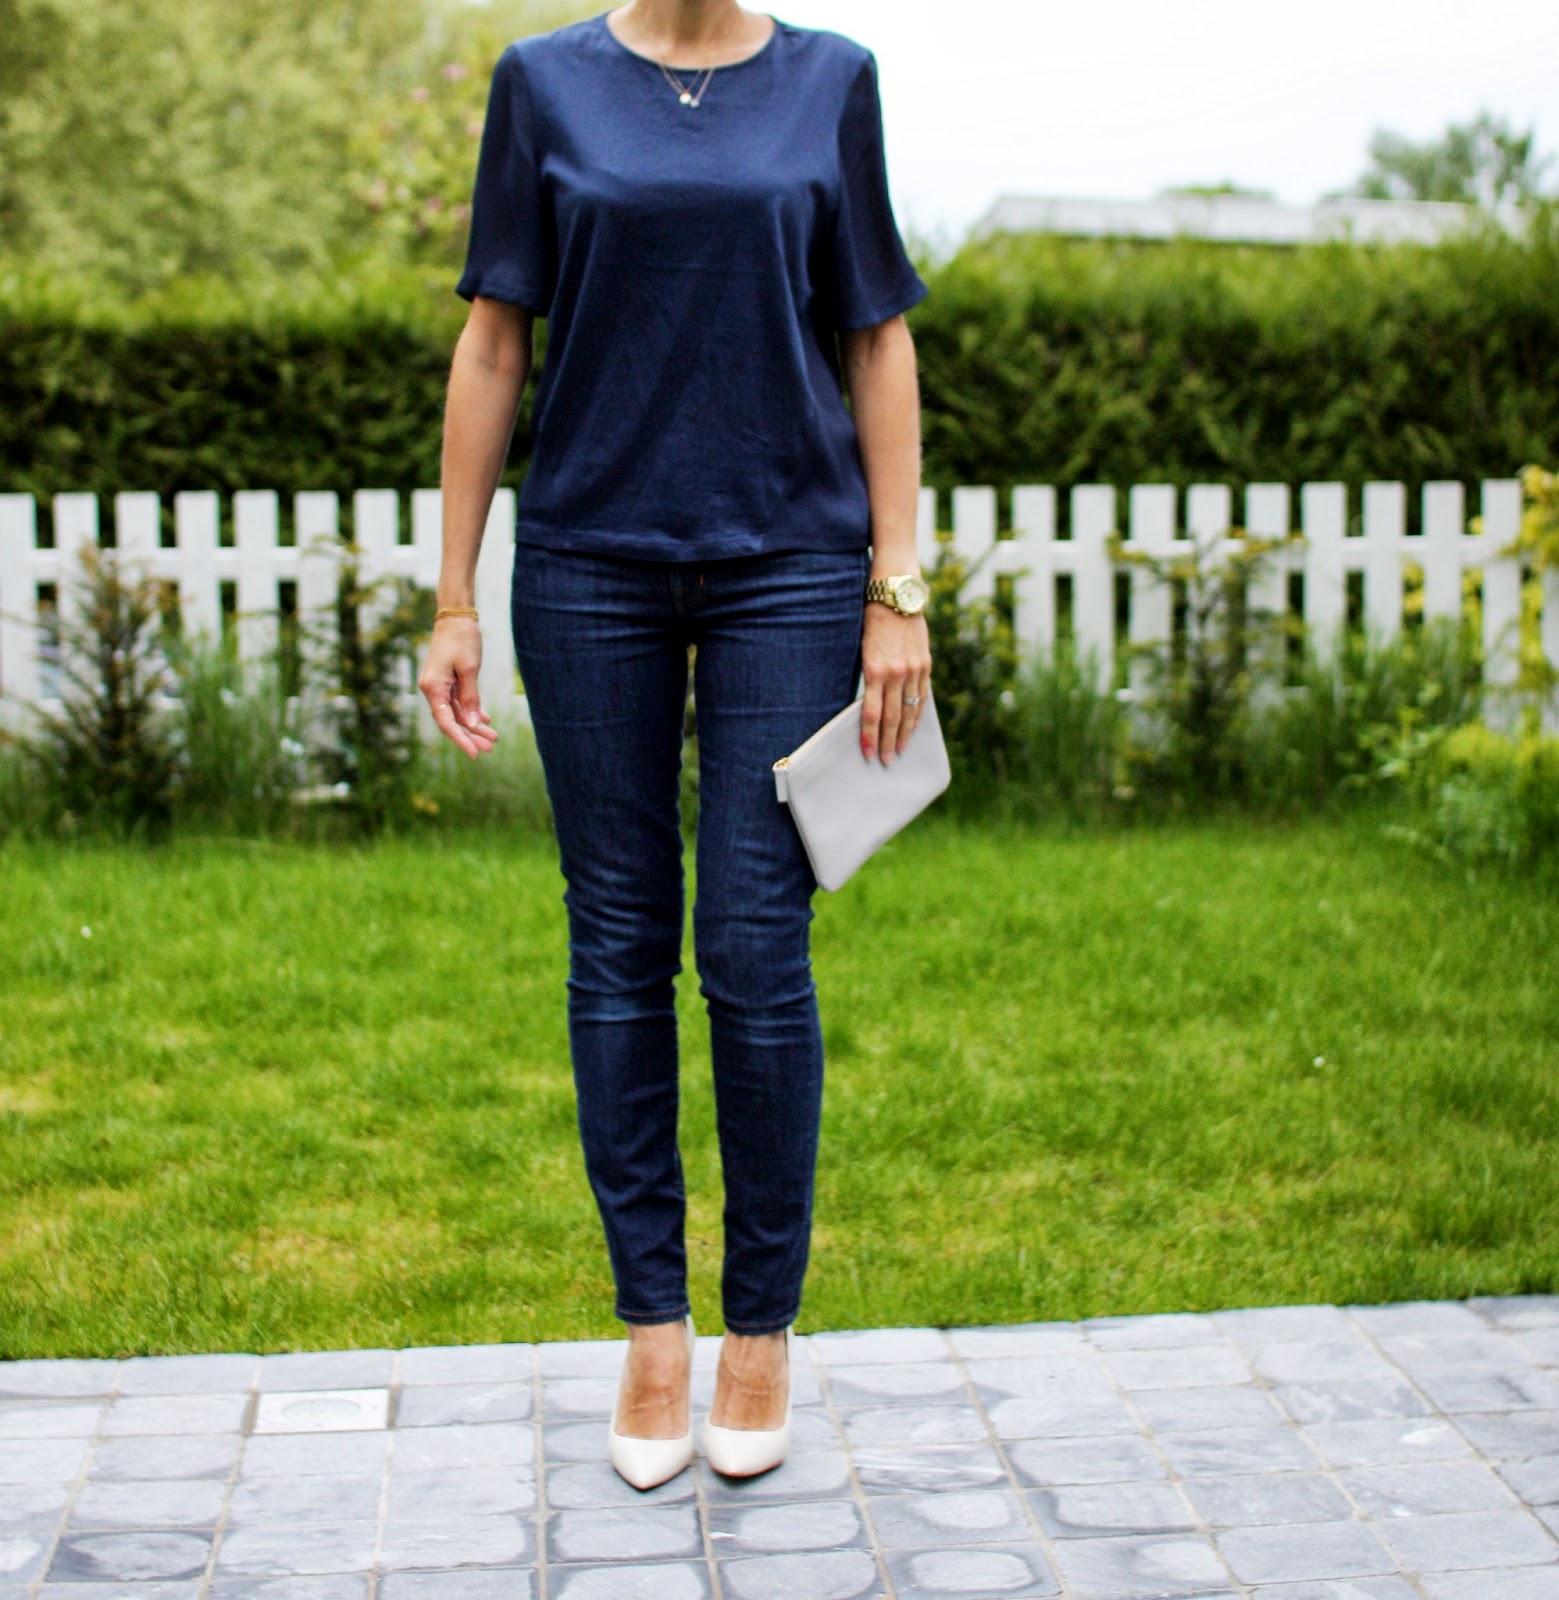 The navy top from & Other Stories